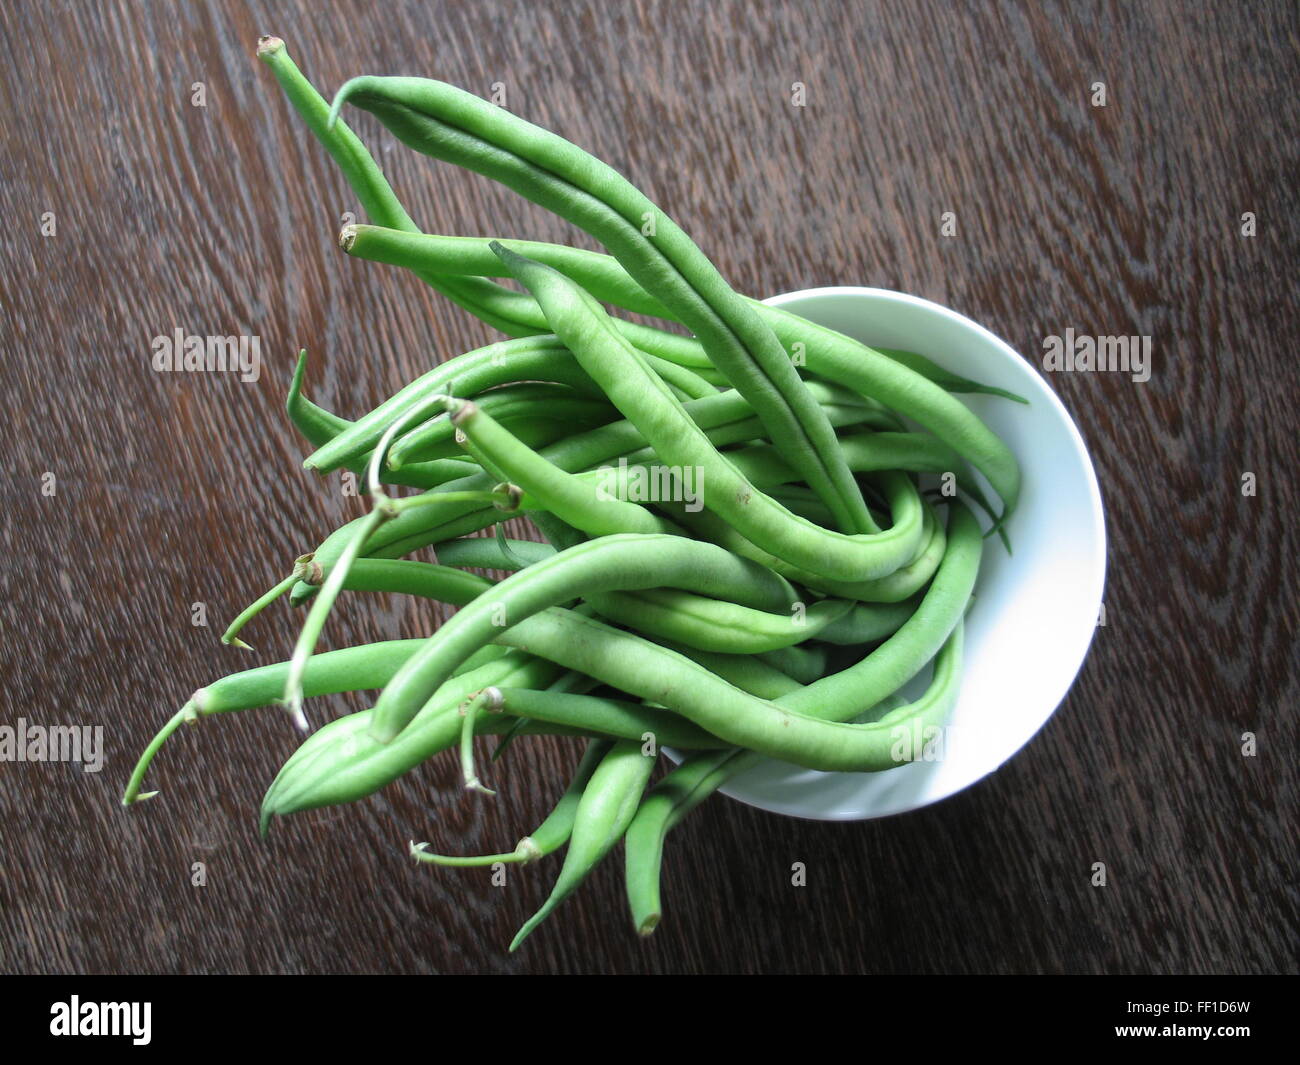 green beans in a dish Stock Photo